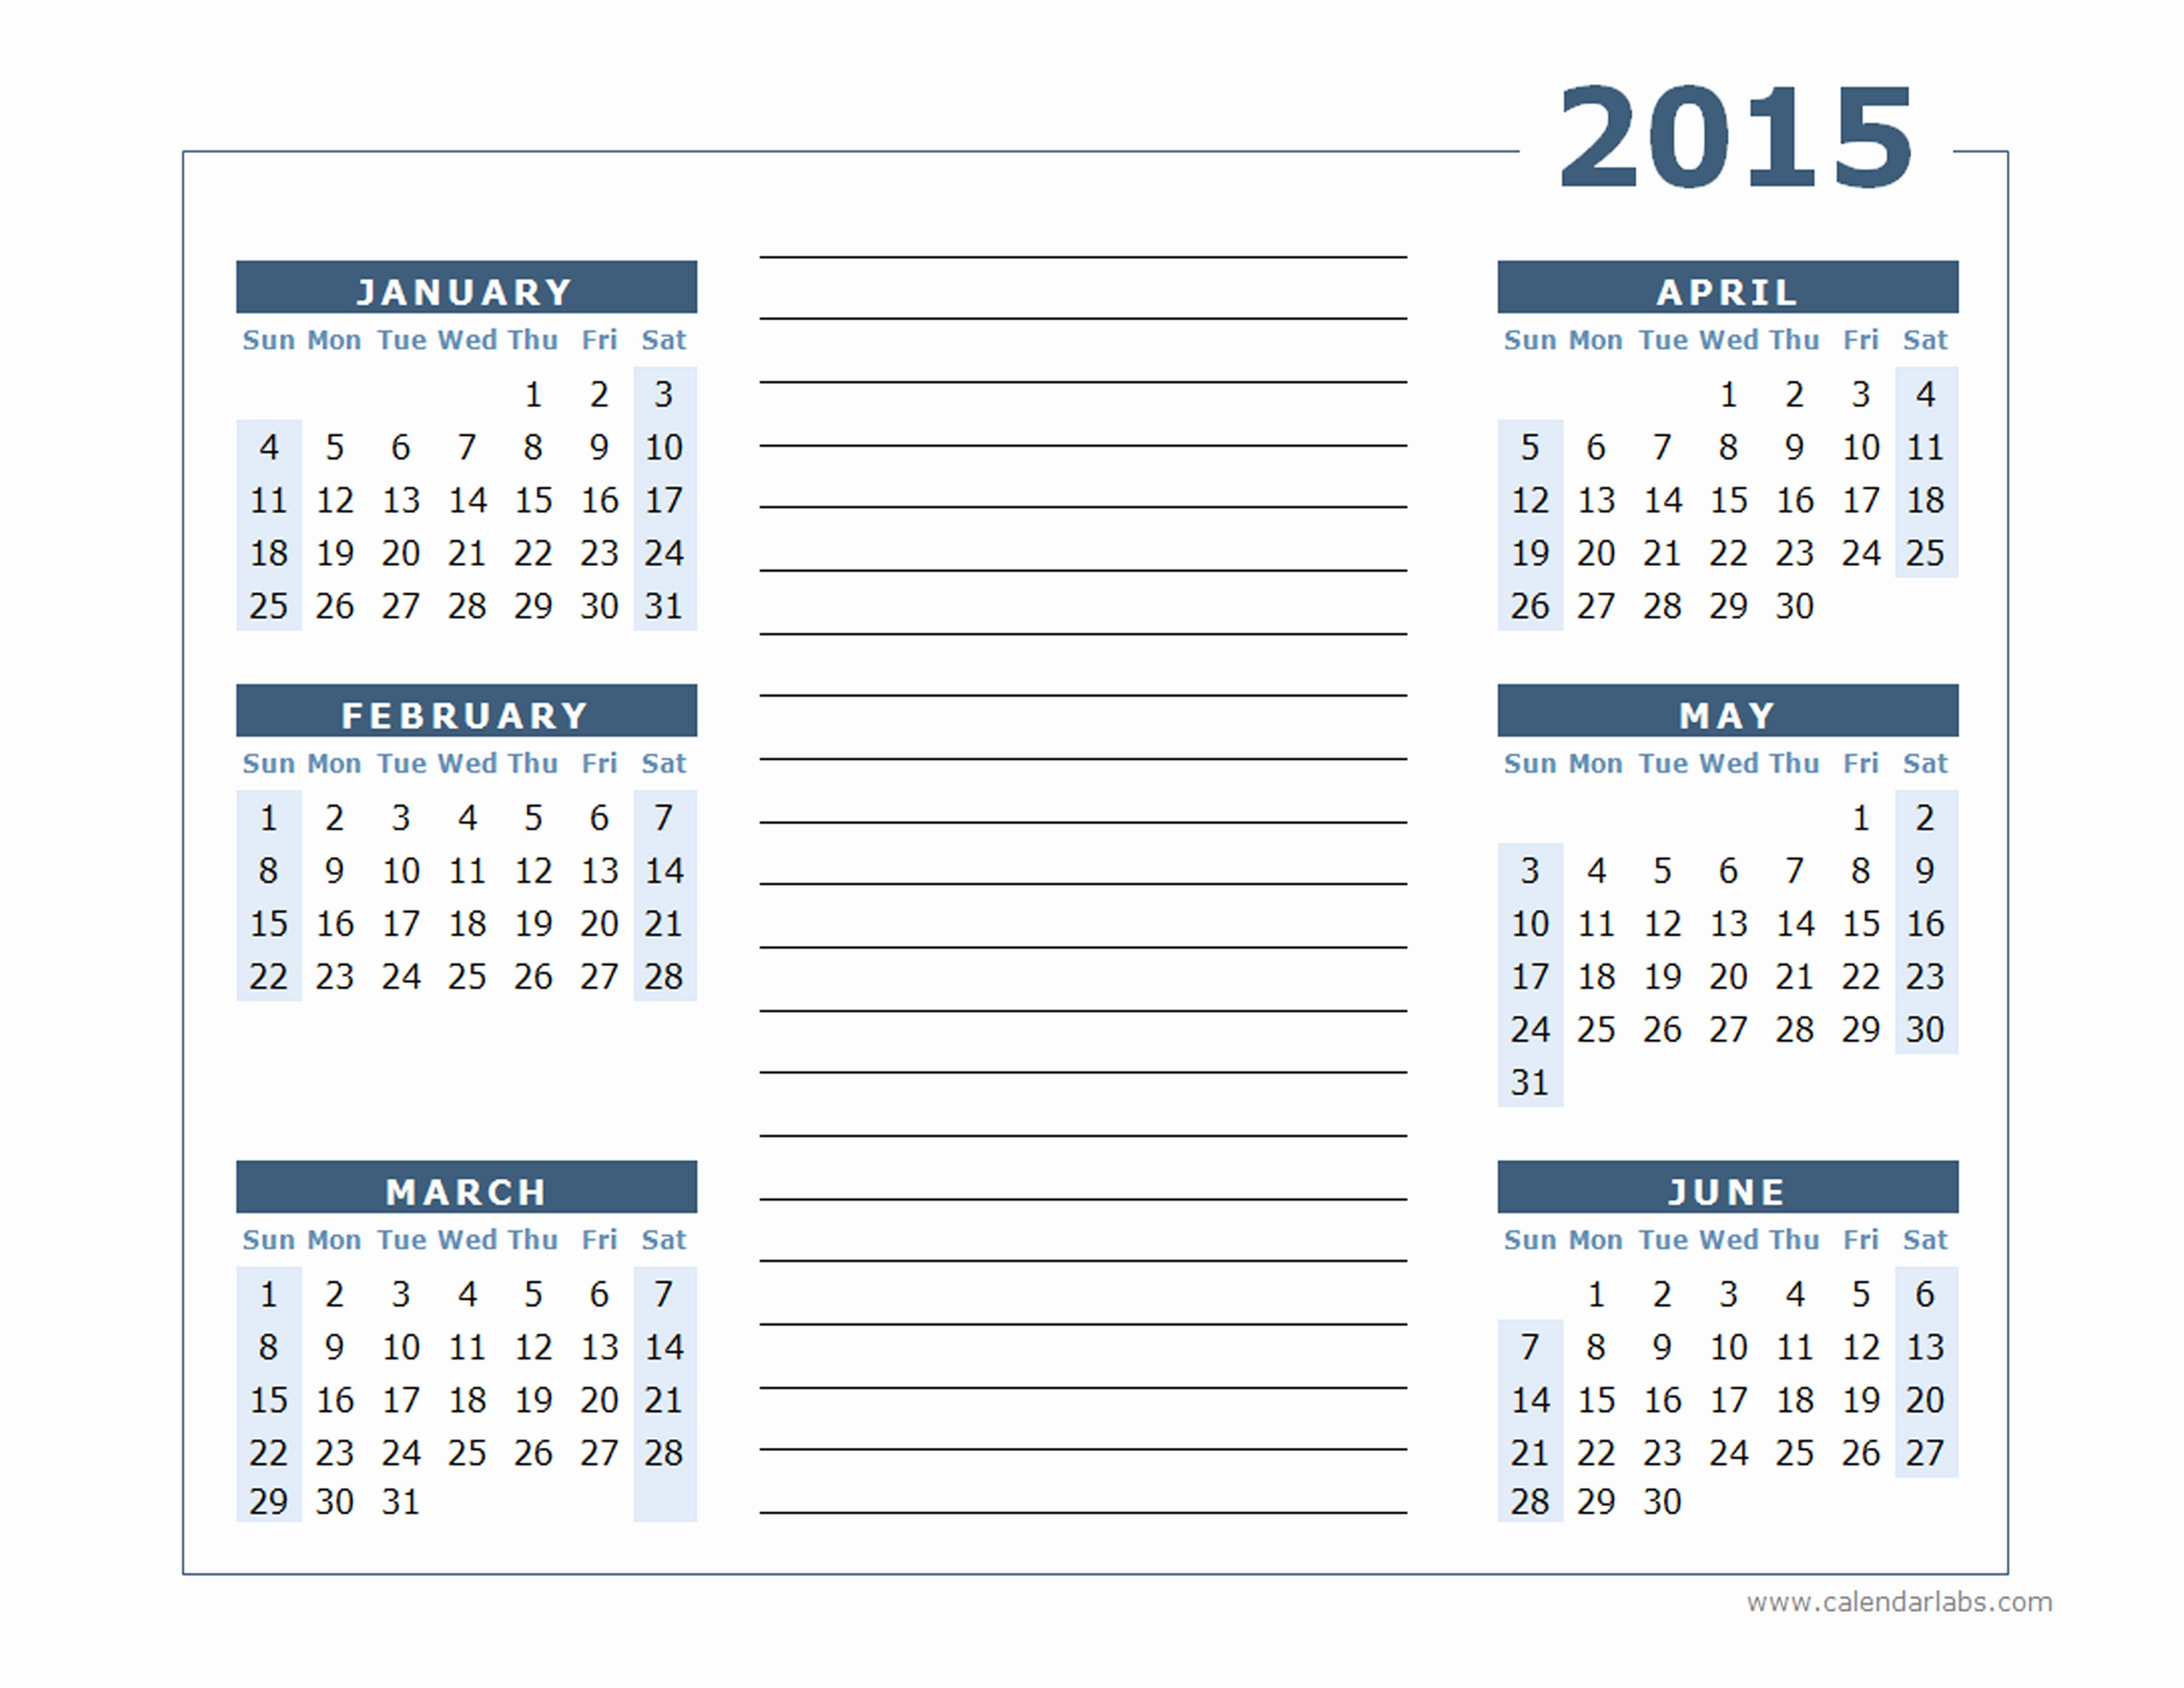 Free 2015 Yearly Calendar Template Lovely 2015 Yearly Calendar Two Page Free Printable Templates